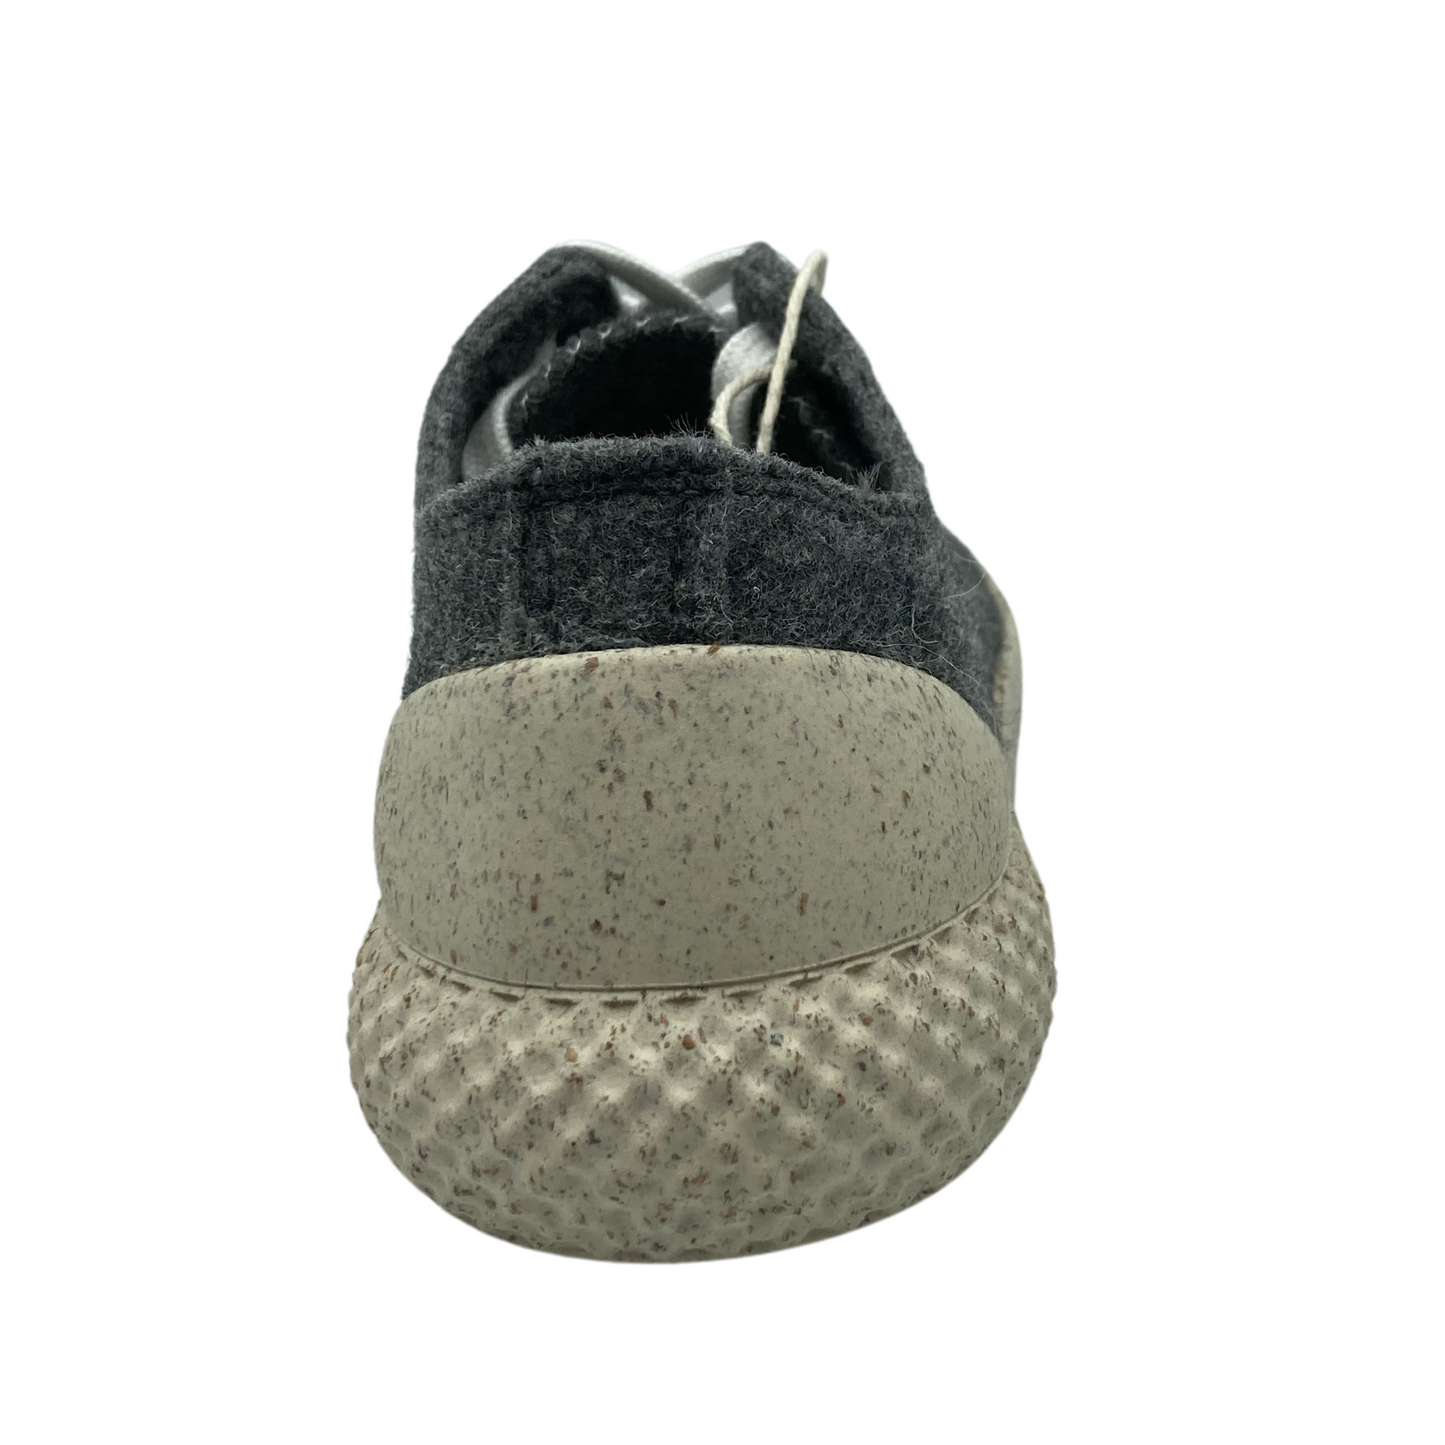 Back view of dark grey wool sneaker with cork outsole